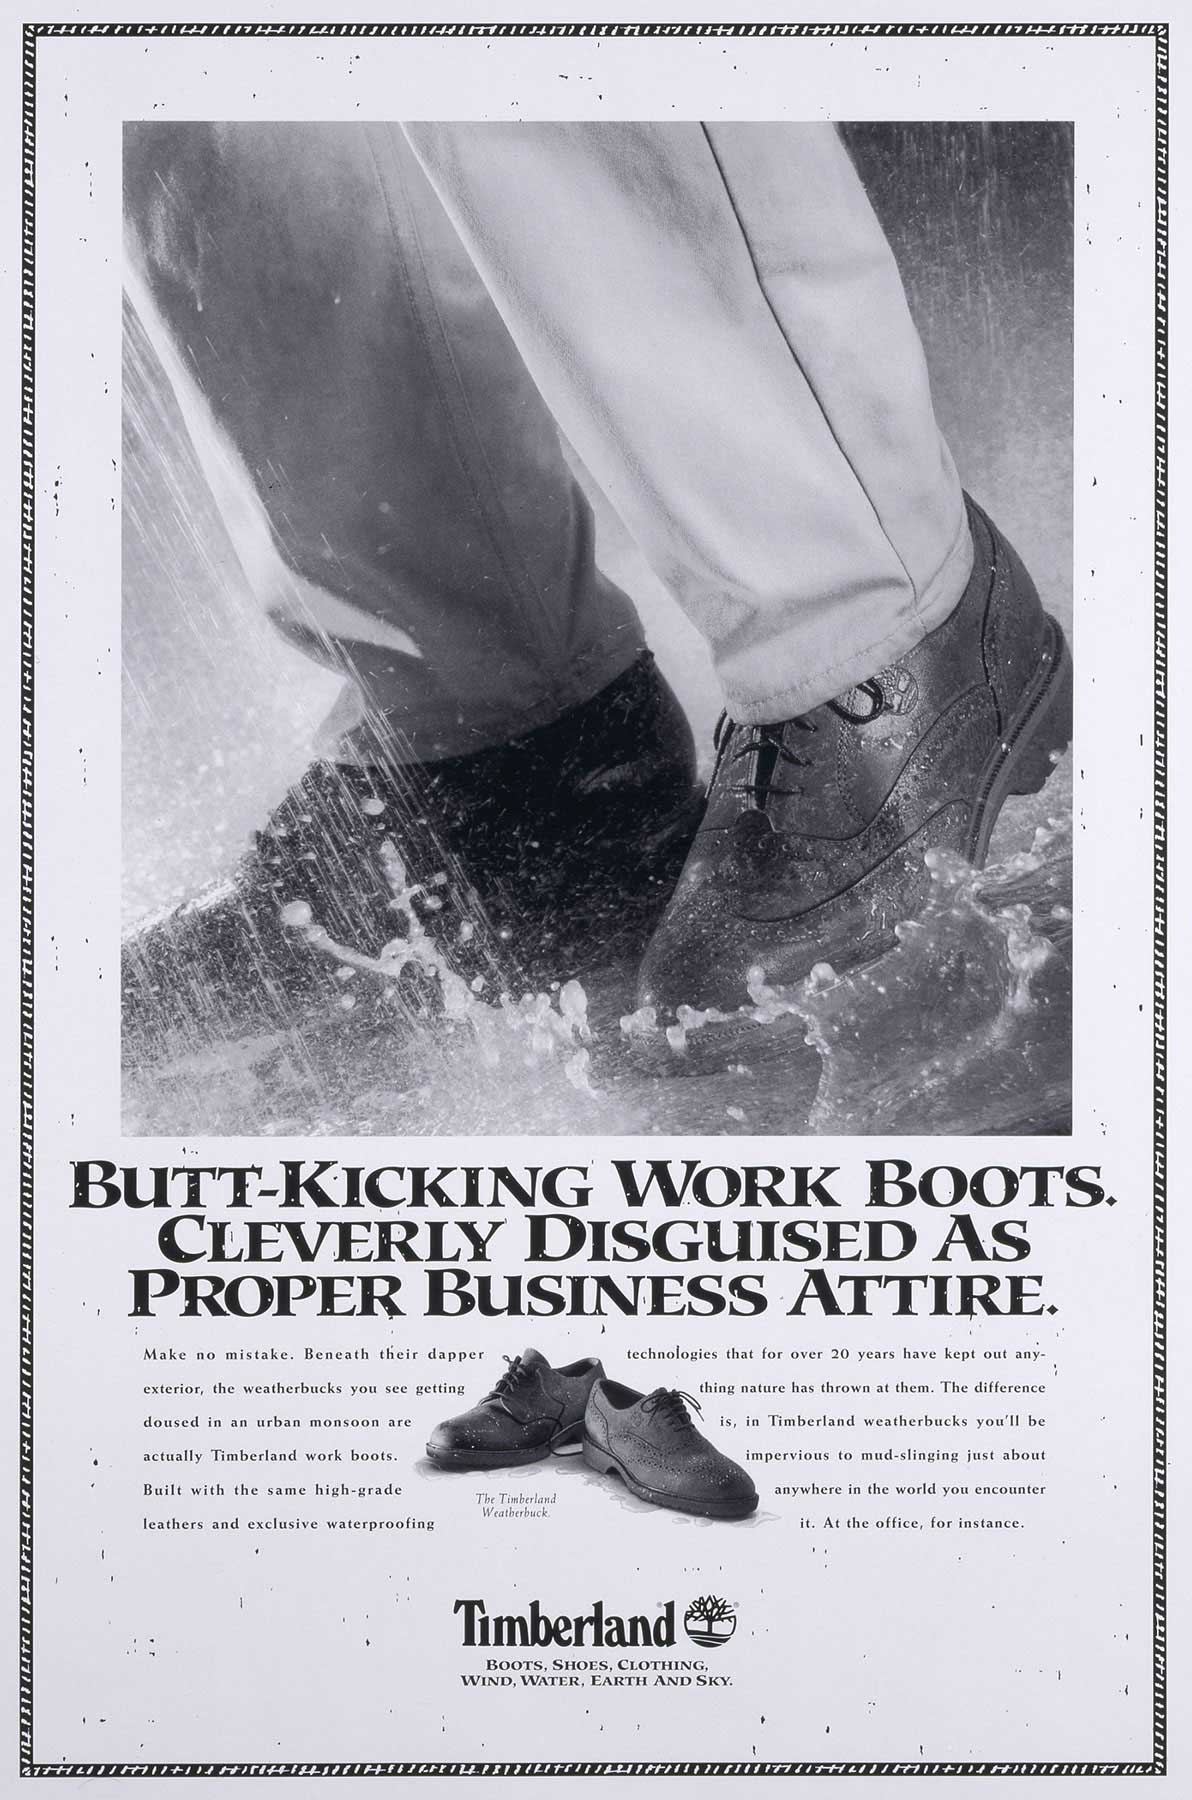 timberland-shoes-in-rain-ad.jpg